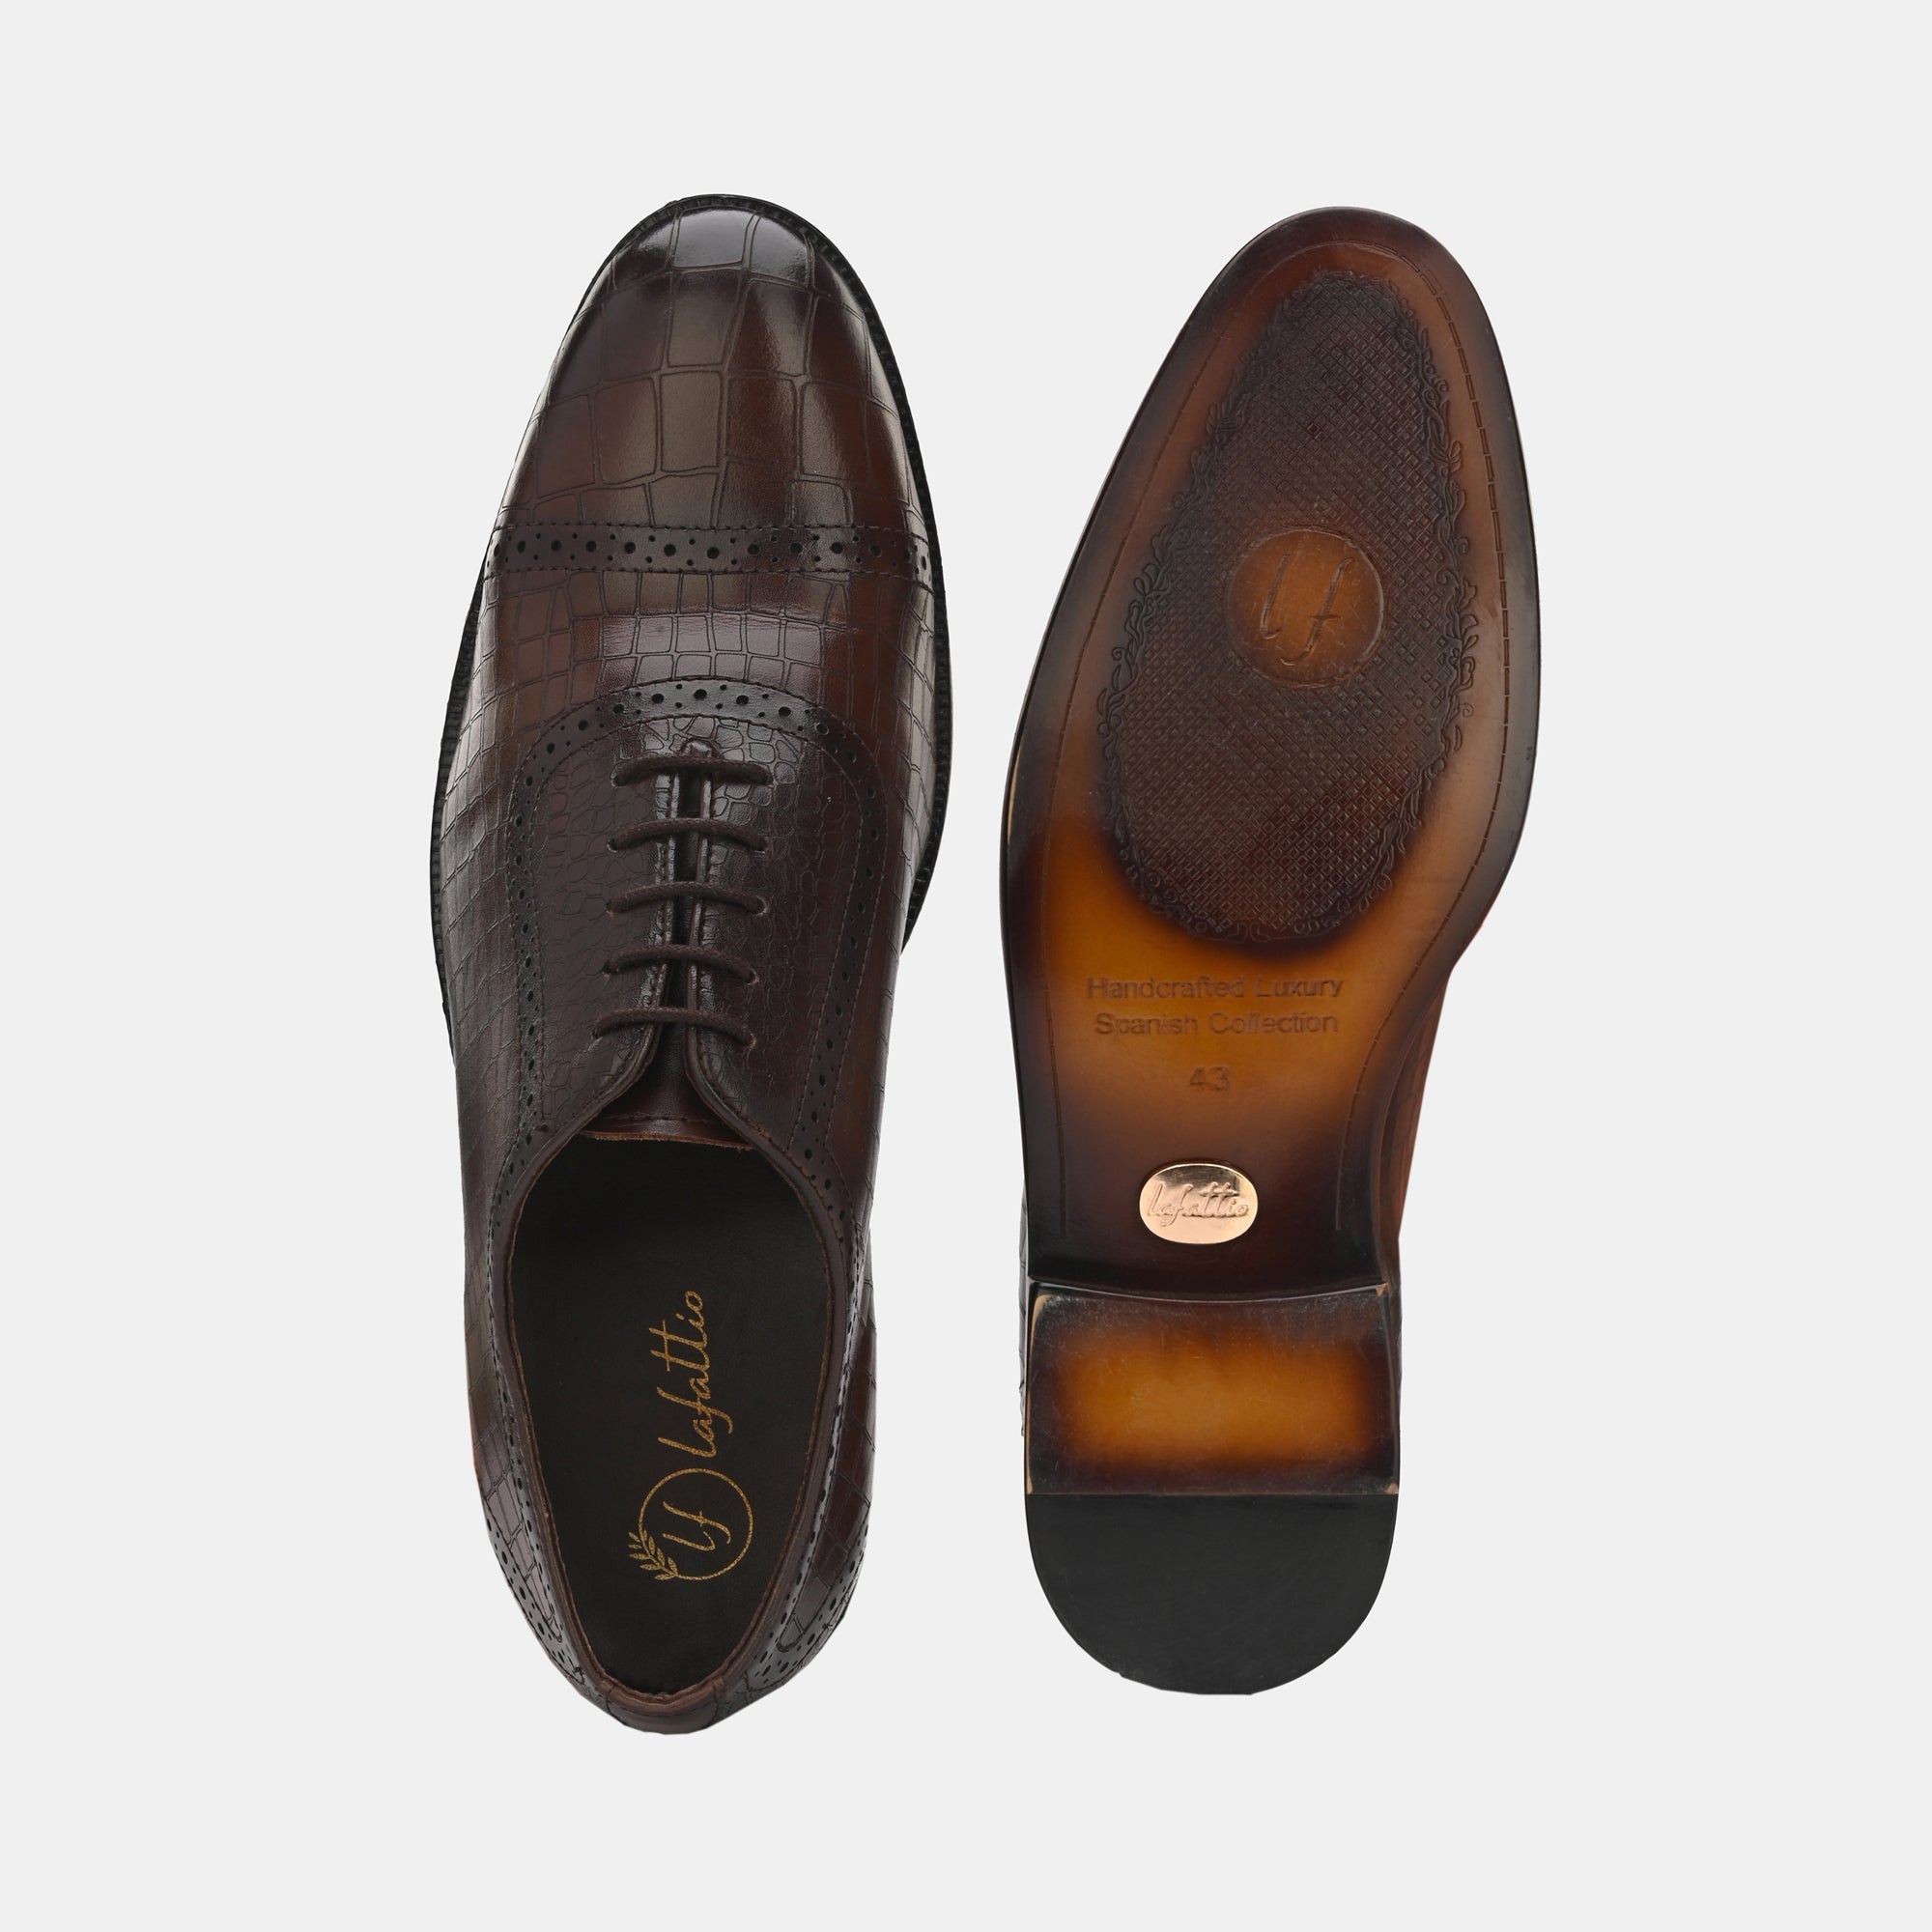 Brown Laser Engraved Semi-Brogues by Lafattio